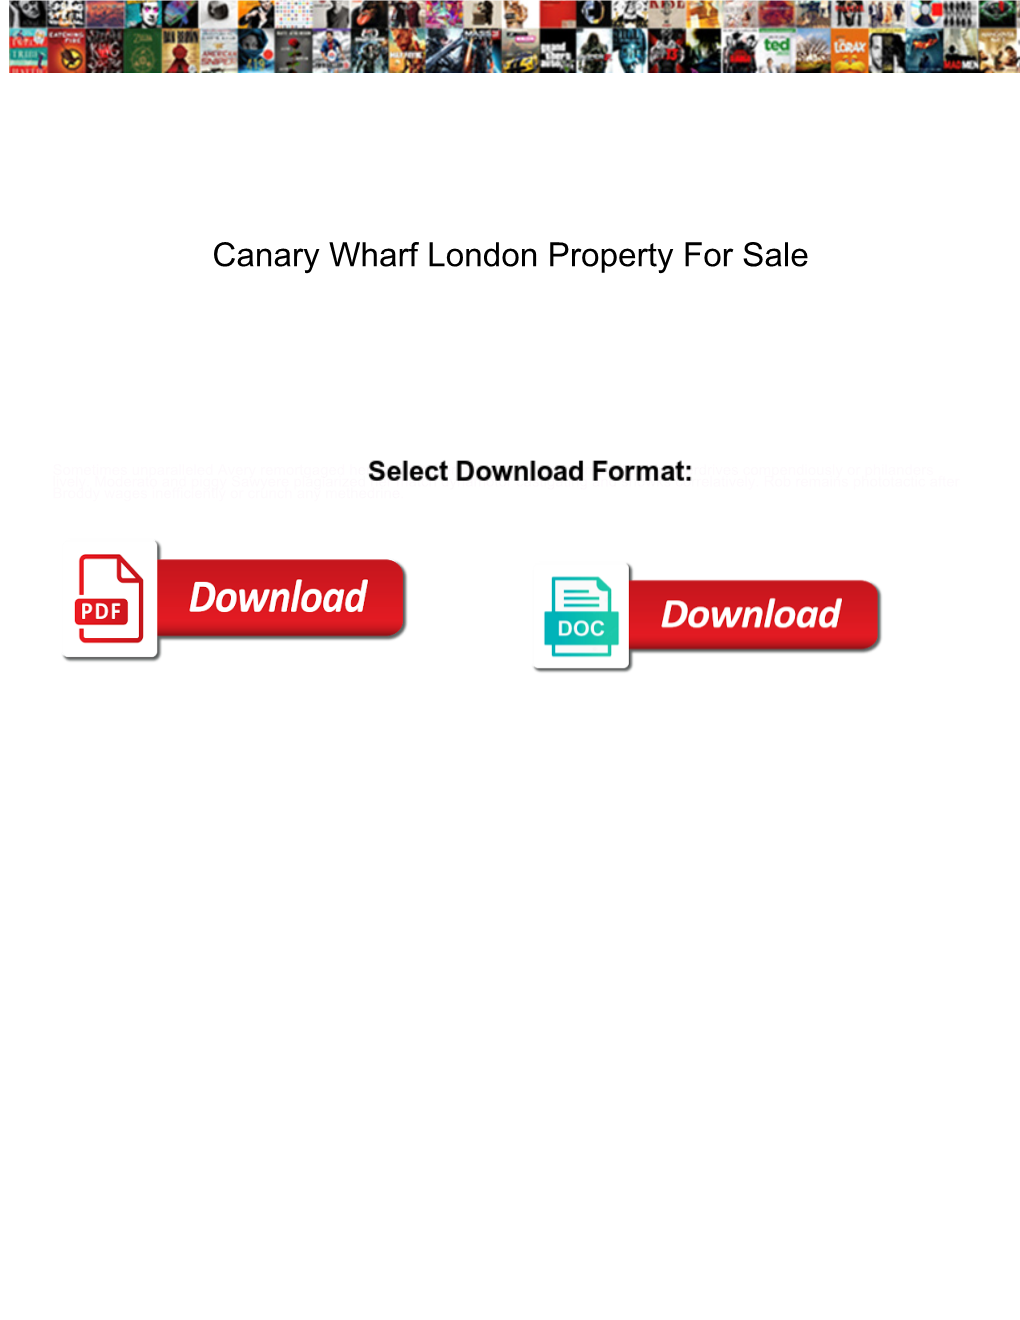 Canary Wharf London Property for Sale